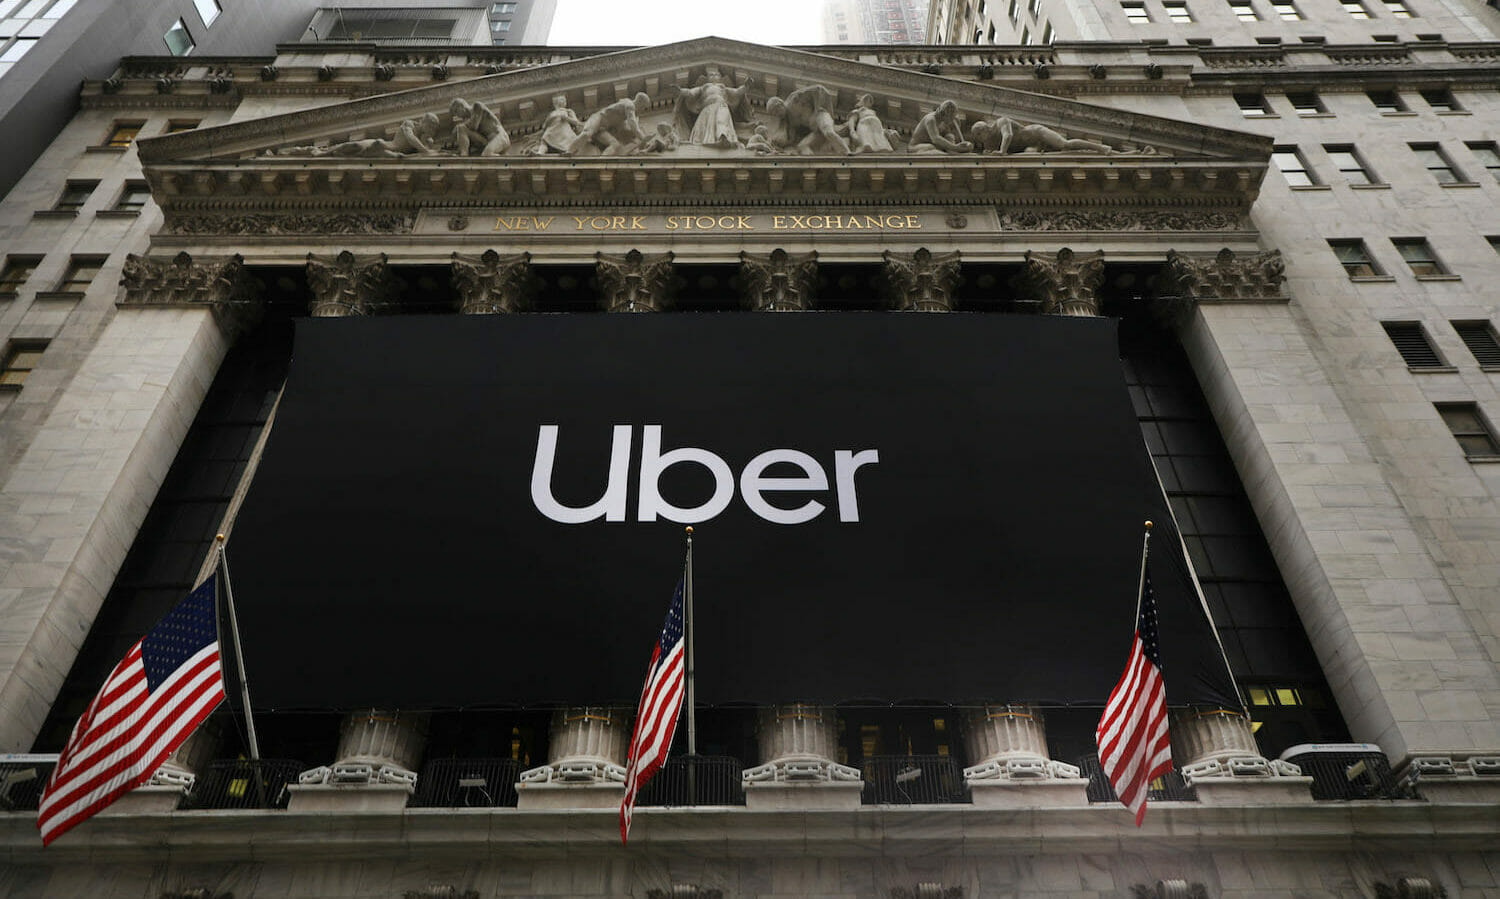 Lessons from Uber: Be crystal clear on the law and your bug bounty policies